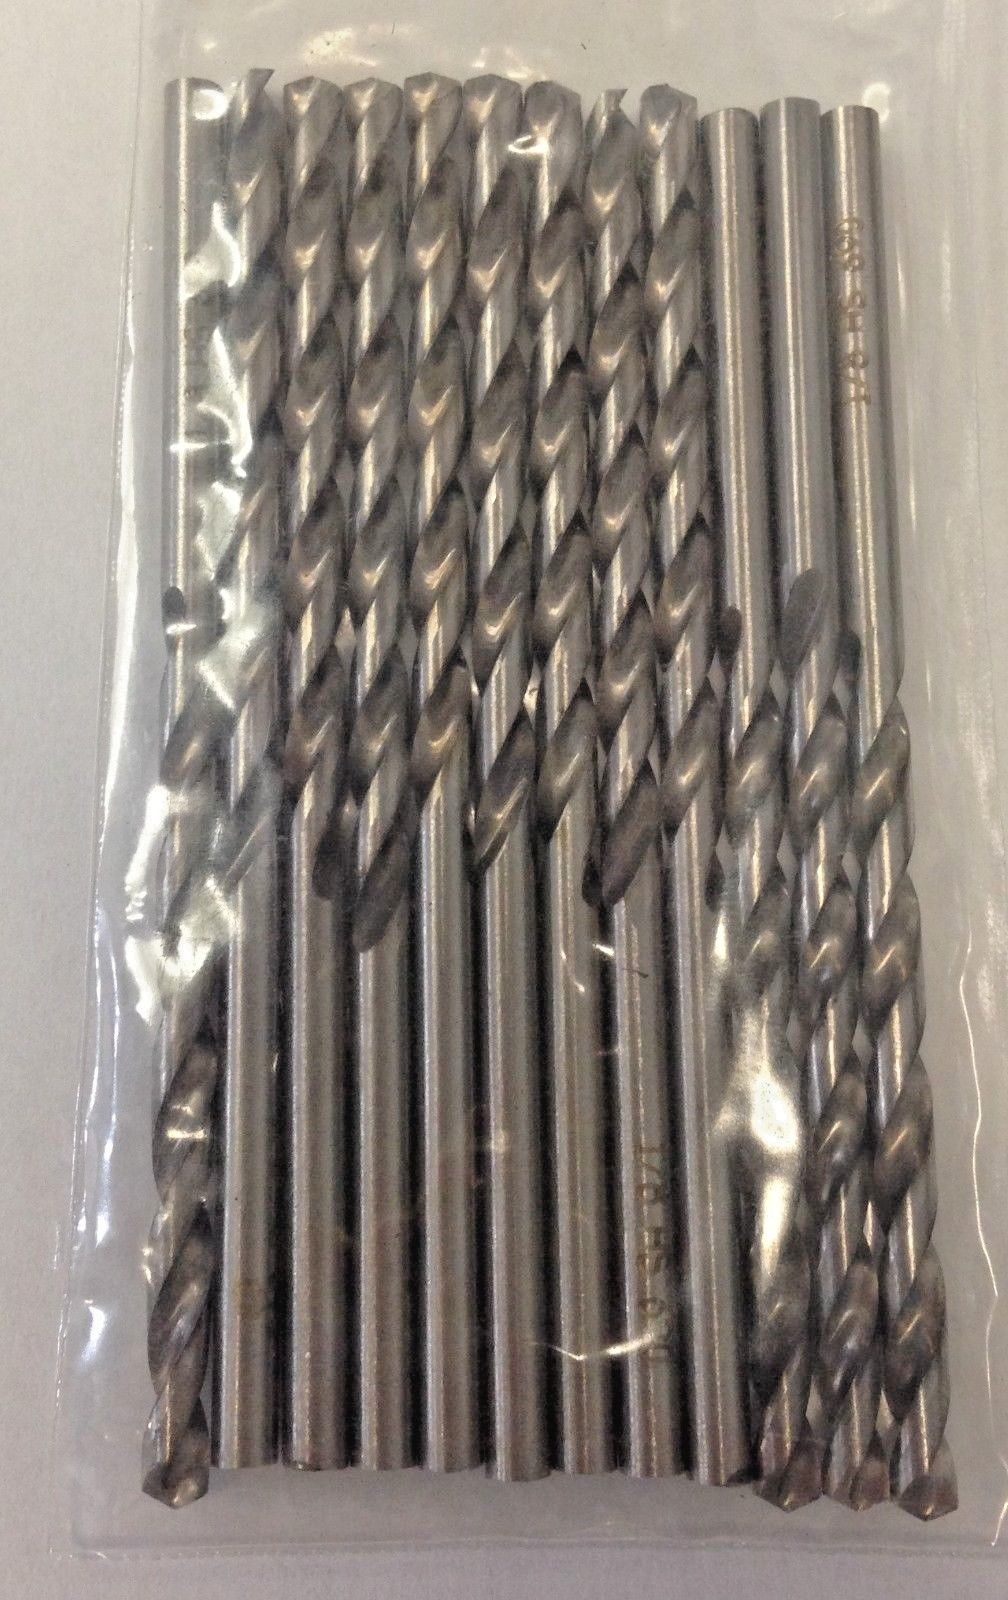 Vermont American 9910268 1/8" HSS Drill Bits 12 Pack